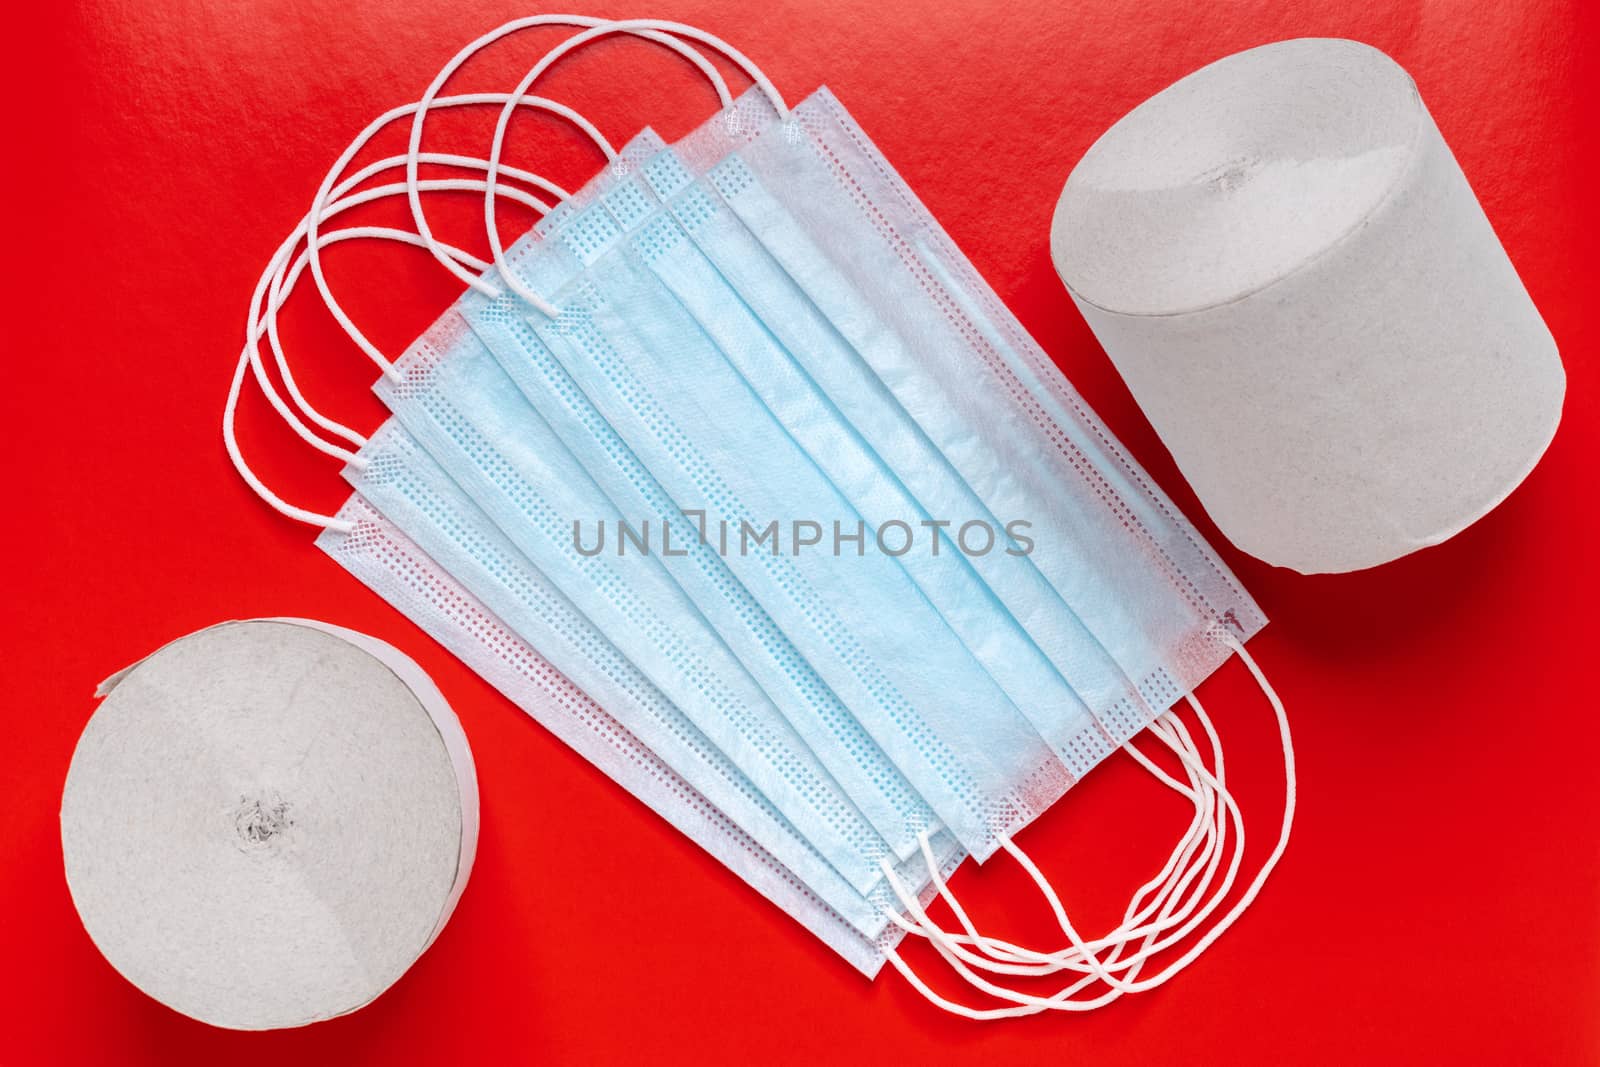 Medical surgical face masks and rolls of toilet paper on red background. World pandemic insurance, airborne diseases, coronavirus by Alexander-Piragis